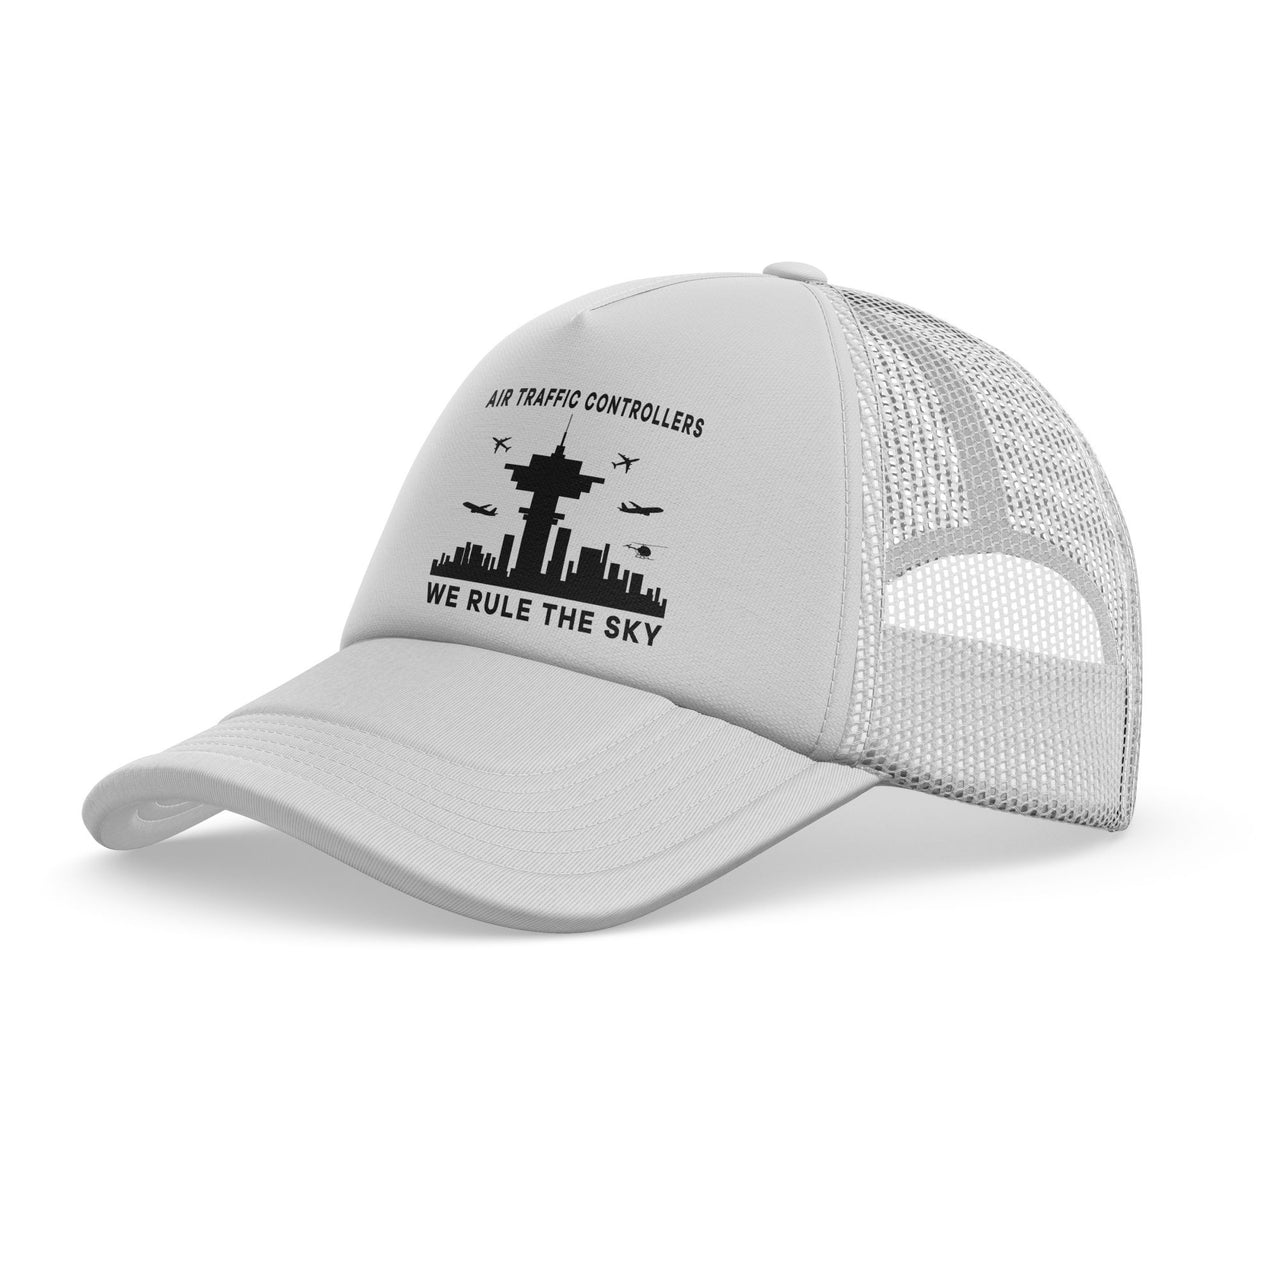 Air Traffic Controllers - We Rule The Sky Designed Trucker Caps & Hats